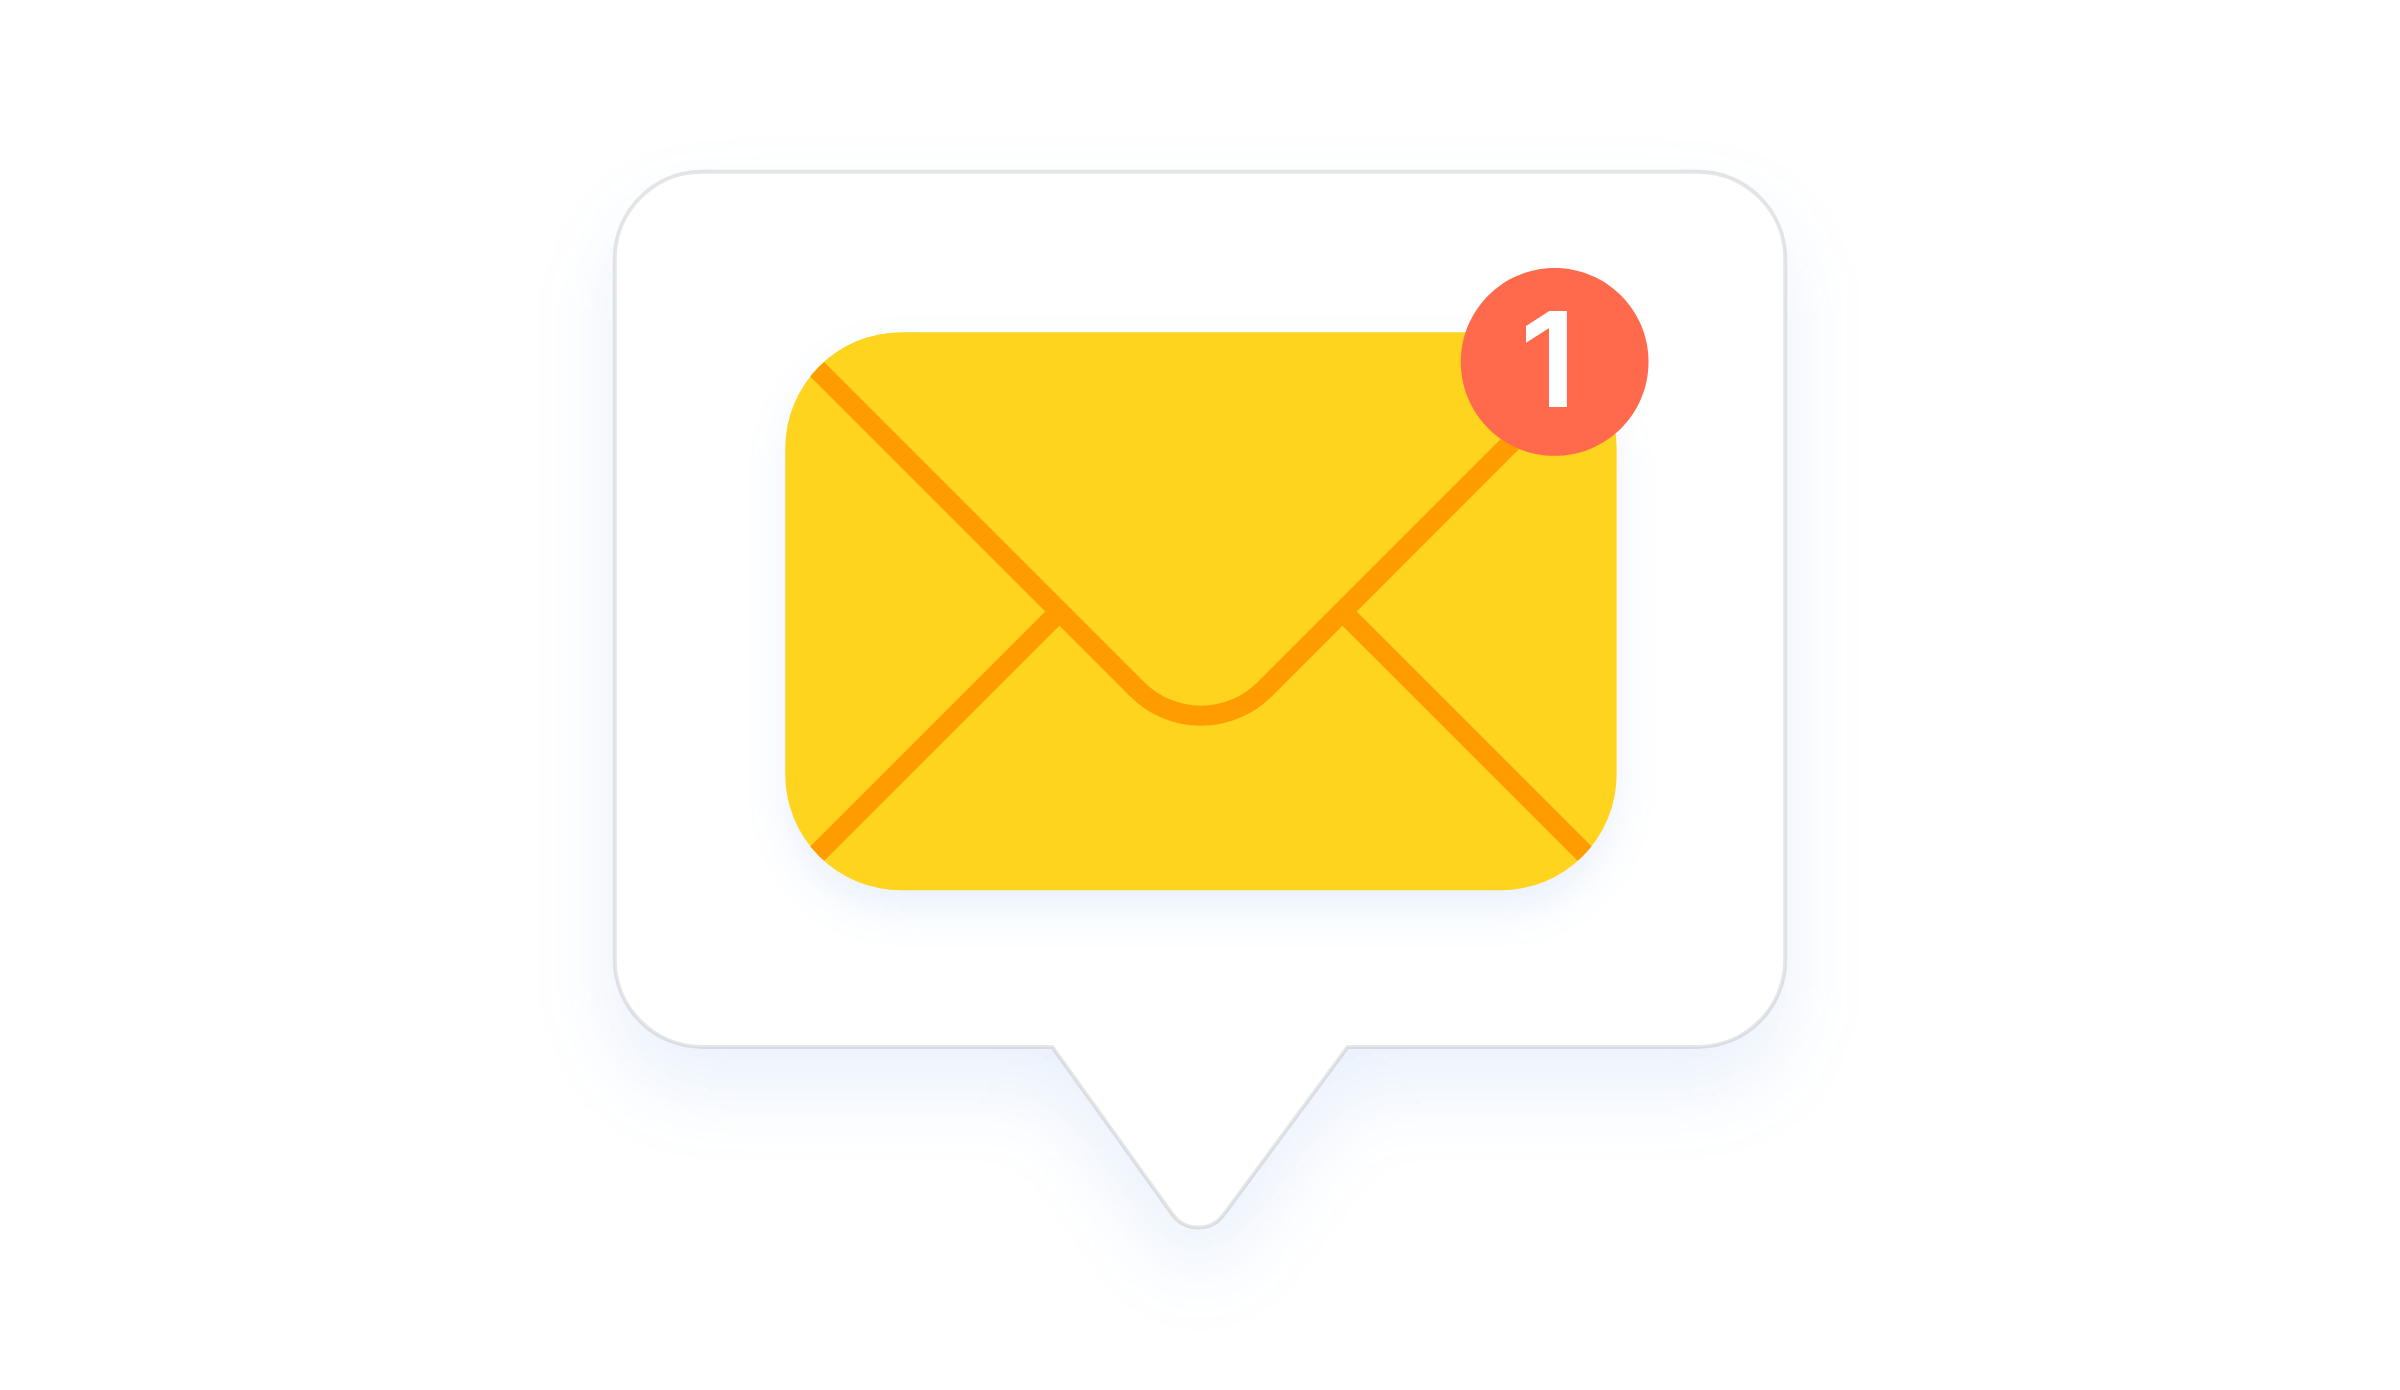 SMS and email support for all communications